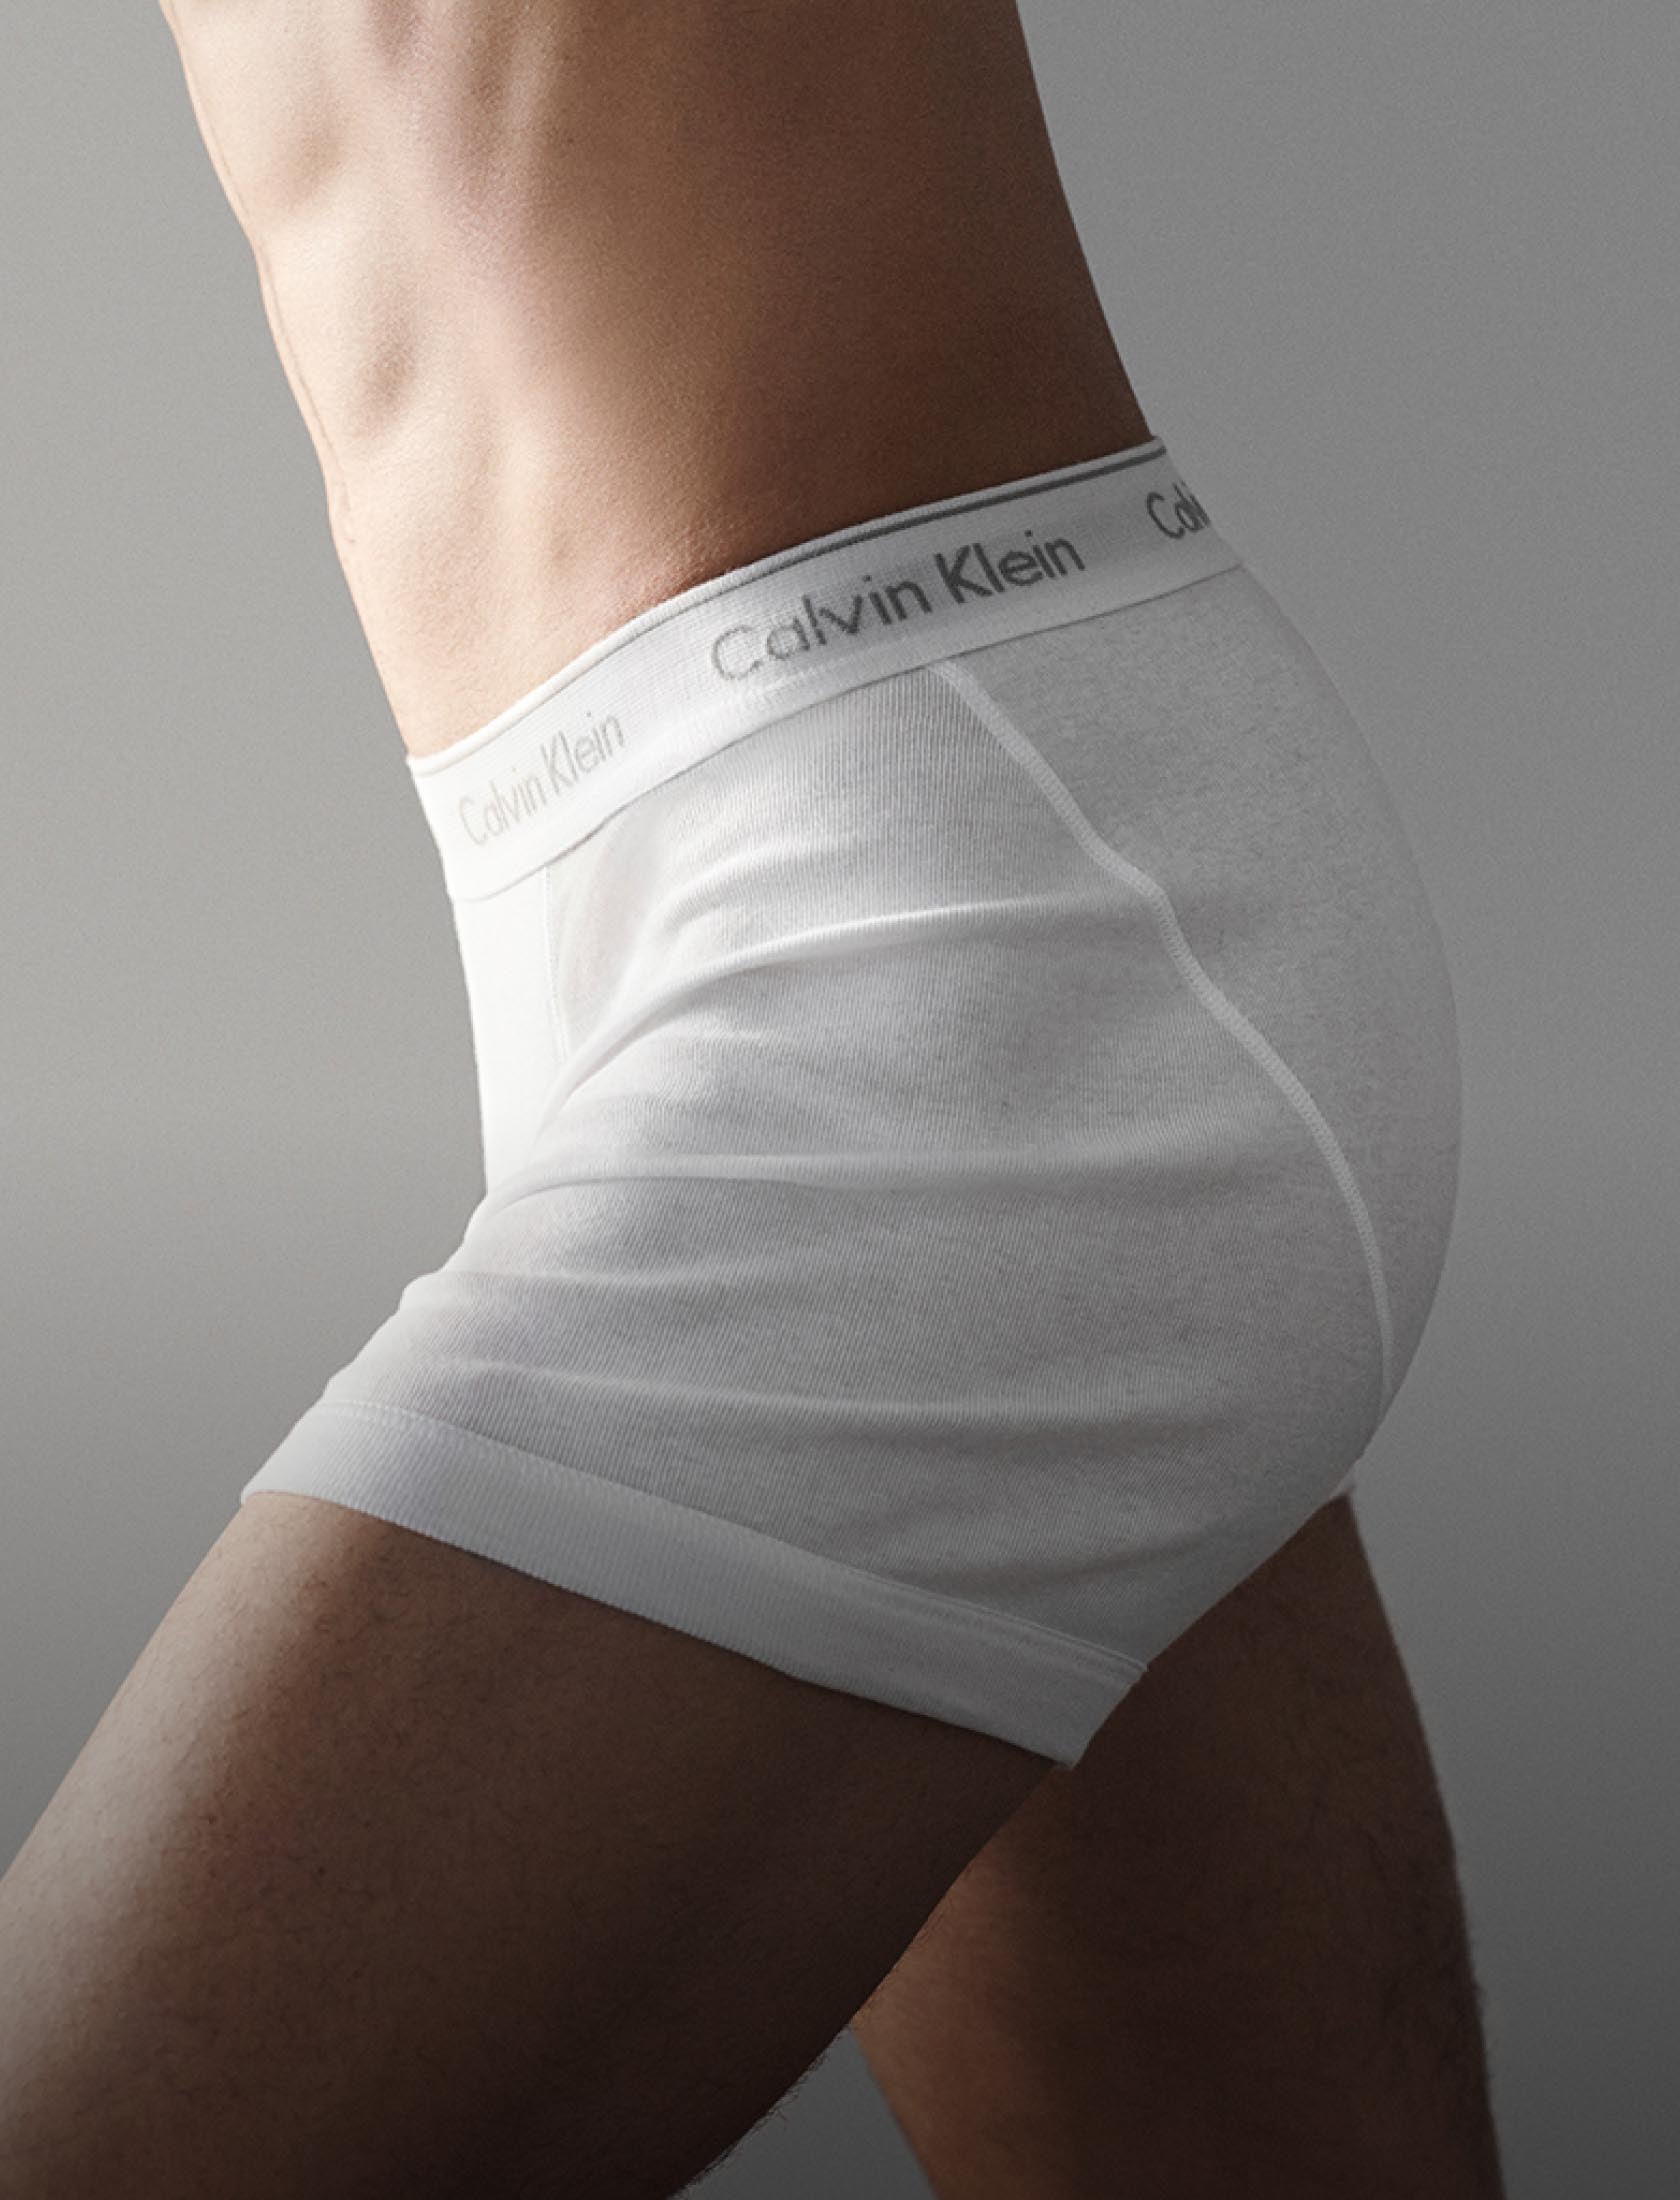 Calvin Klein 100% Cotton Classic Fit 4 Pack Brief New Box Black Red Green  Purple